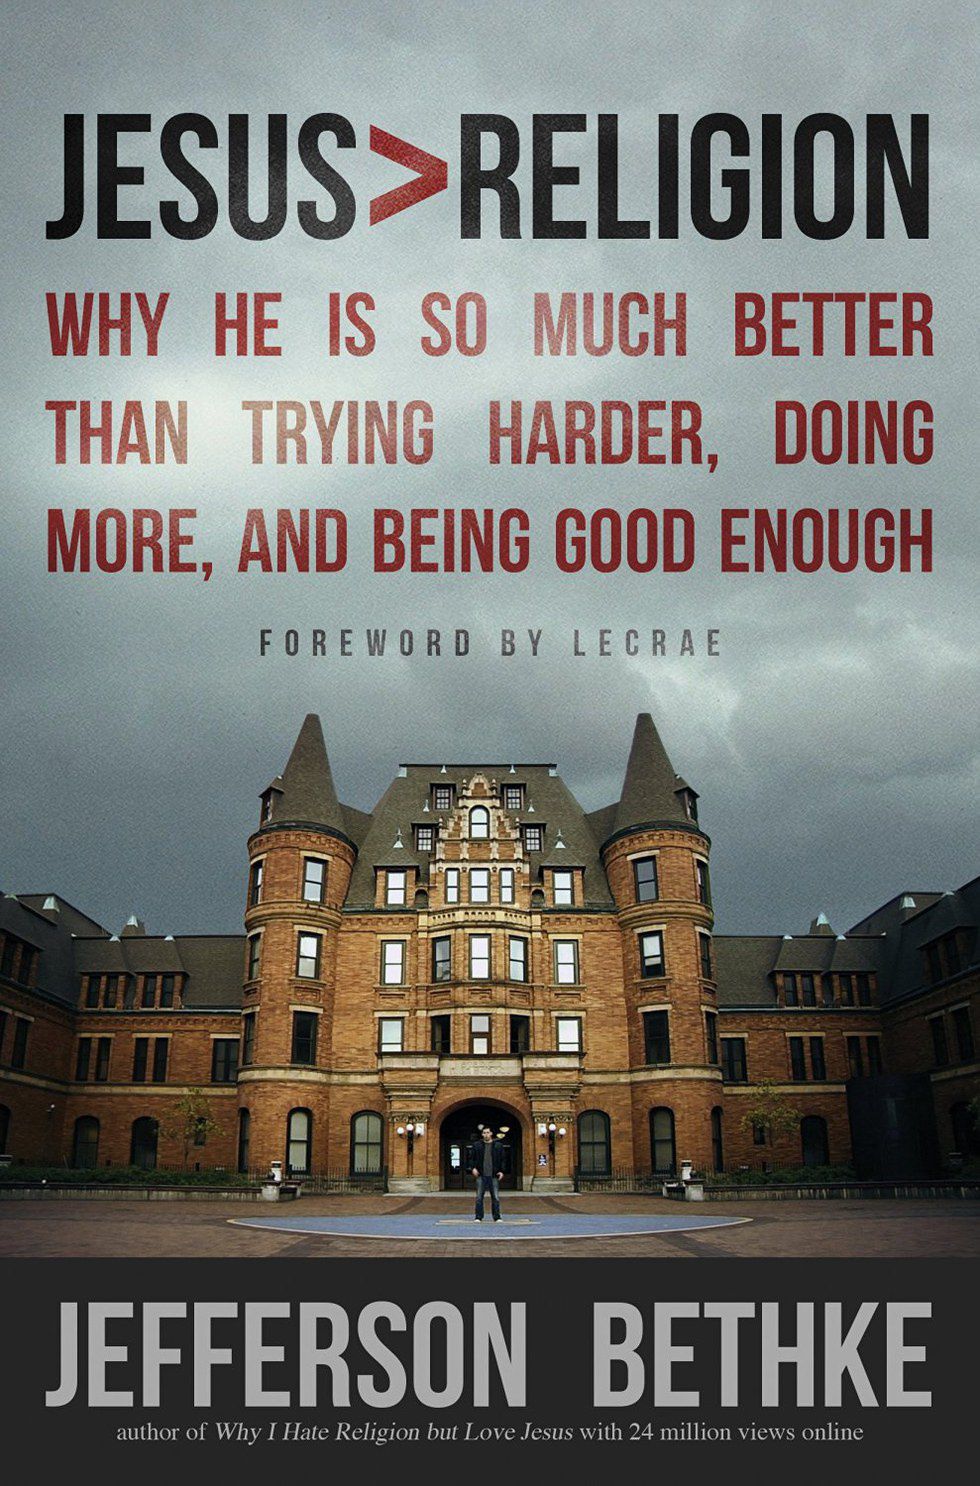 Jesus > Religion: Why He is So Much Better Than Trying Harder, Doing More, and Being Good Enough by Jefferson Bethke